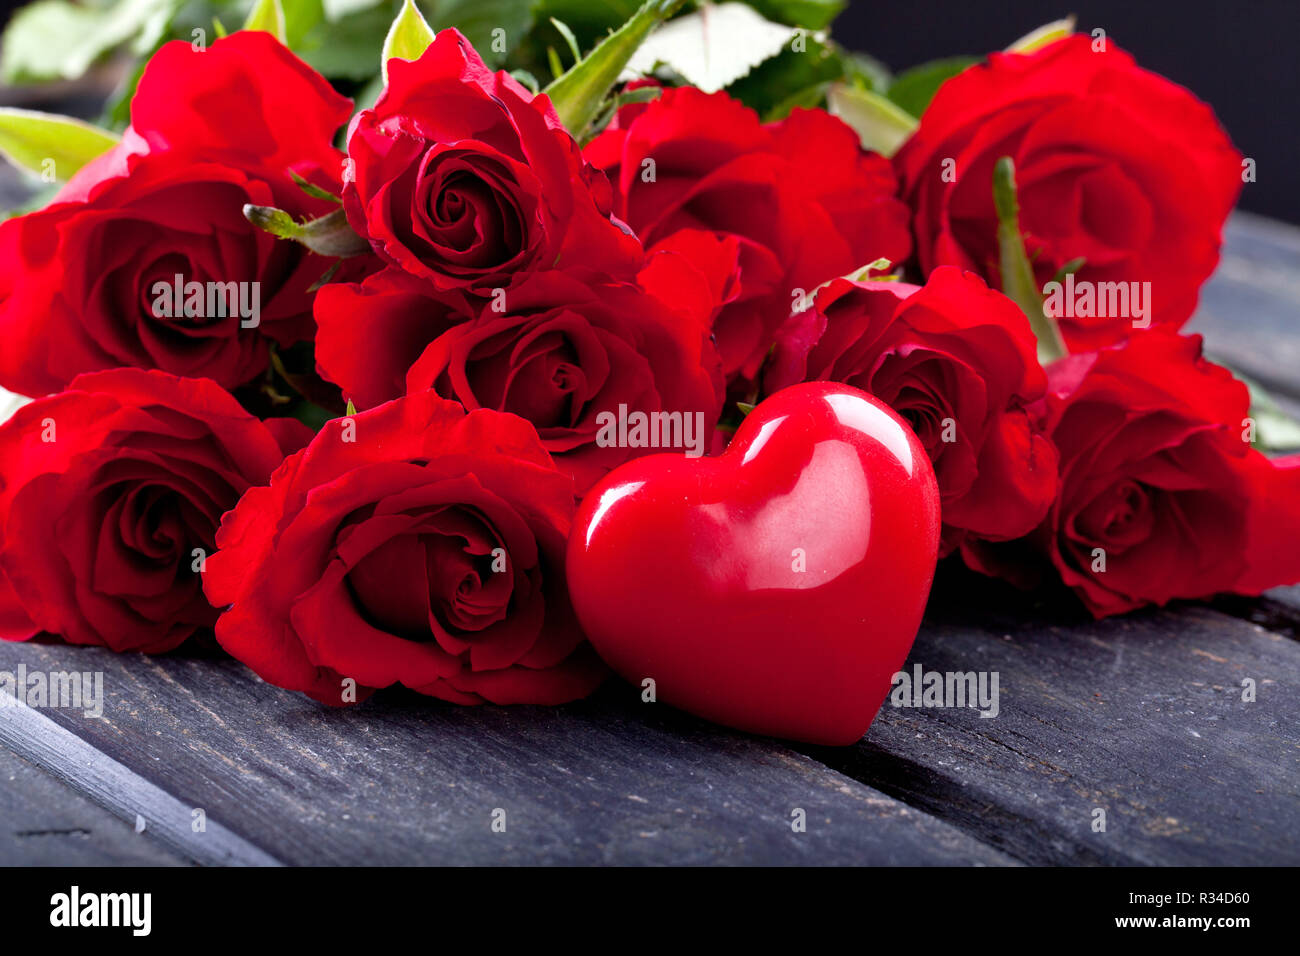 red hearts and red roses Stock Photo